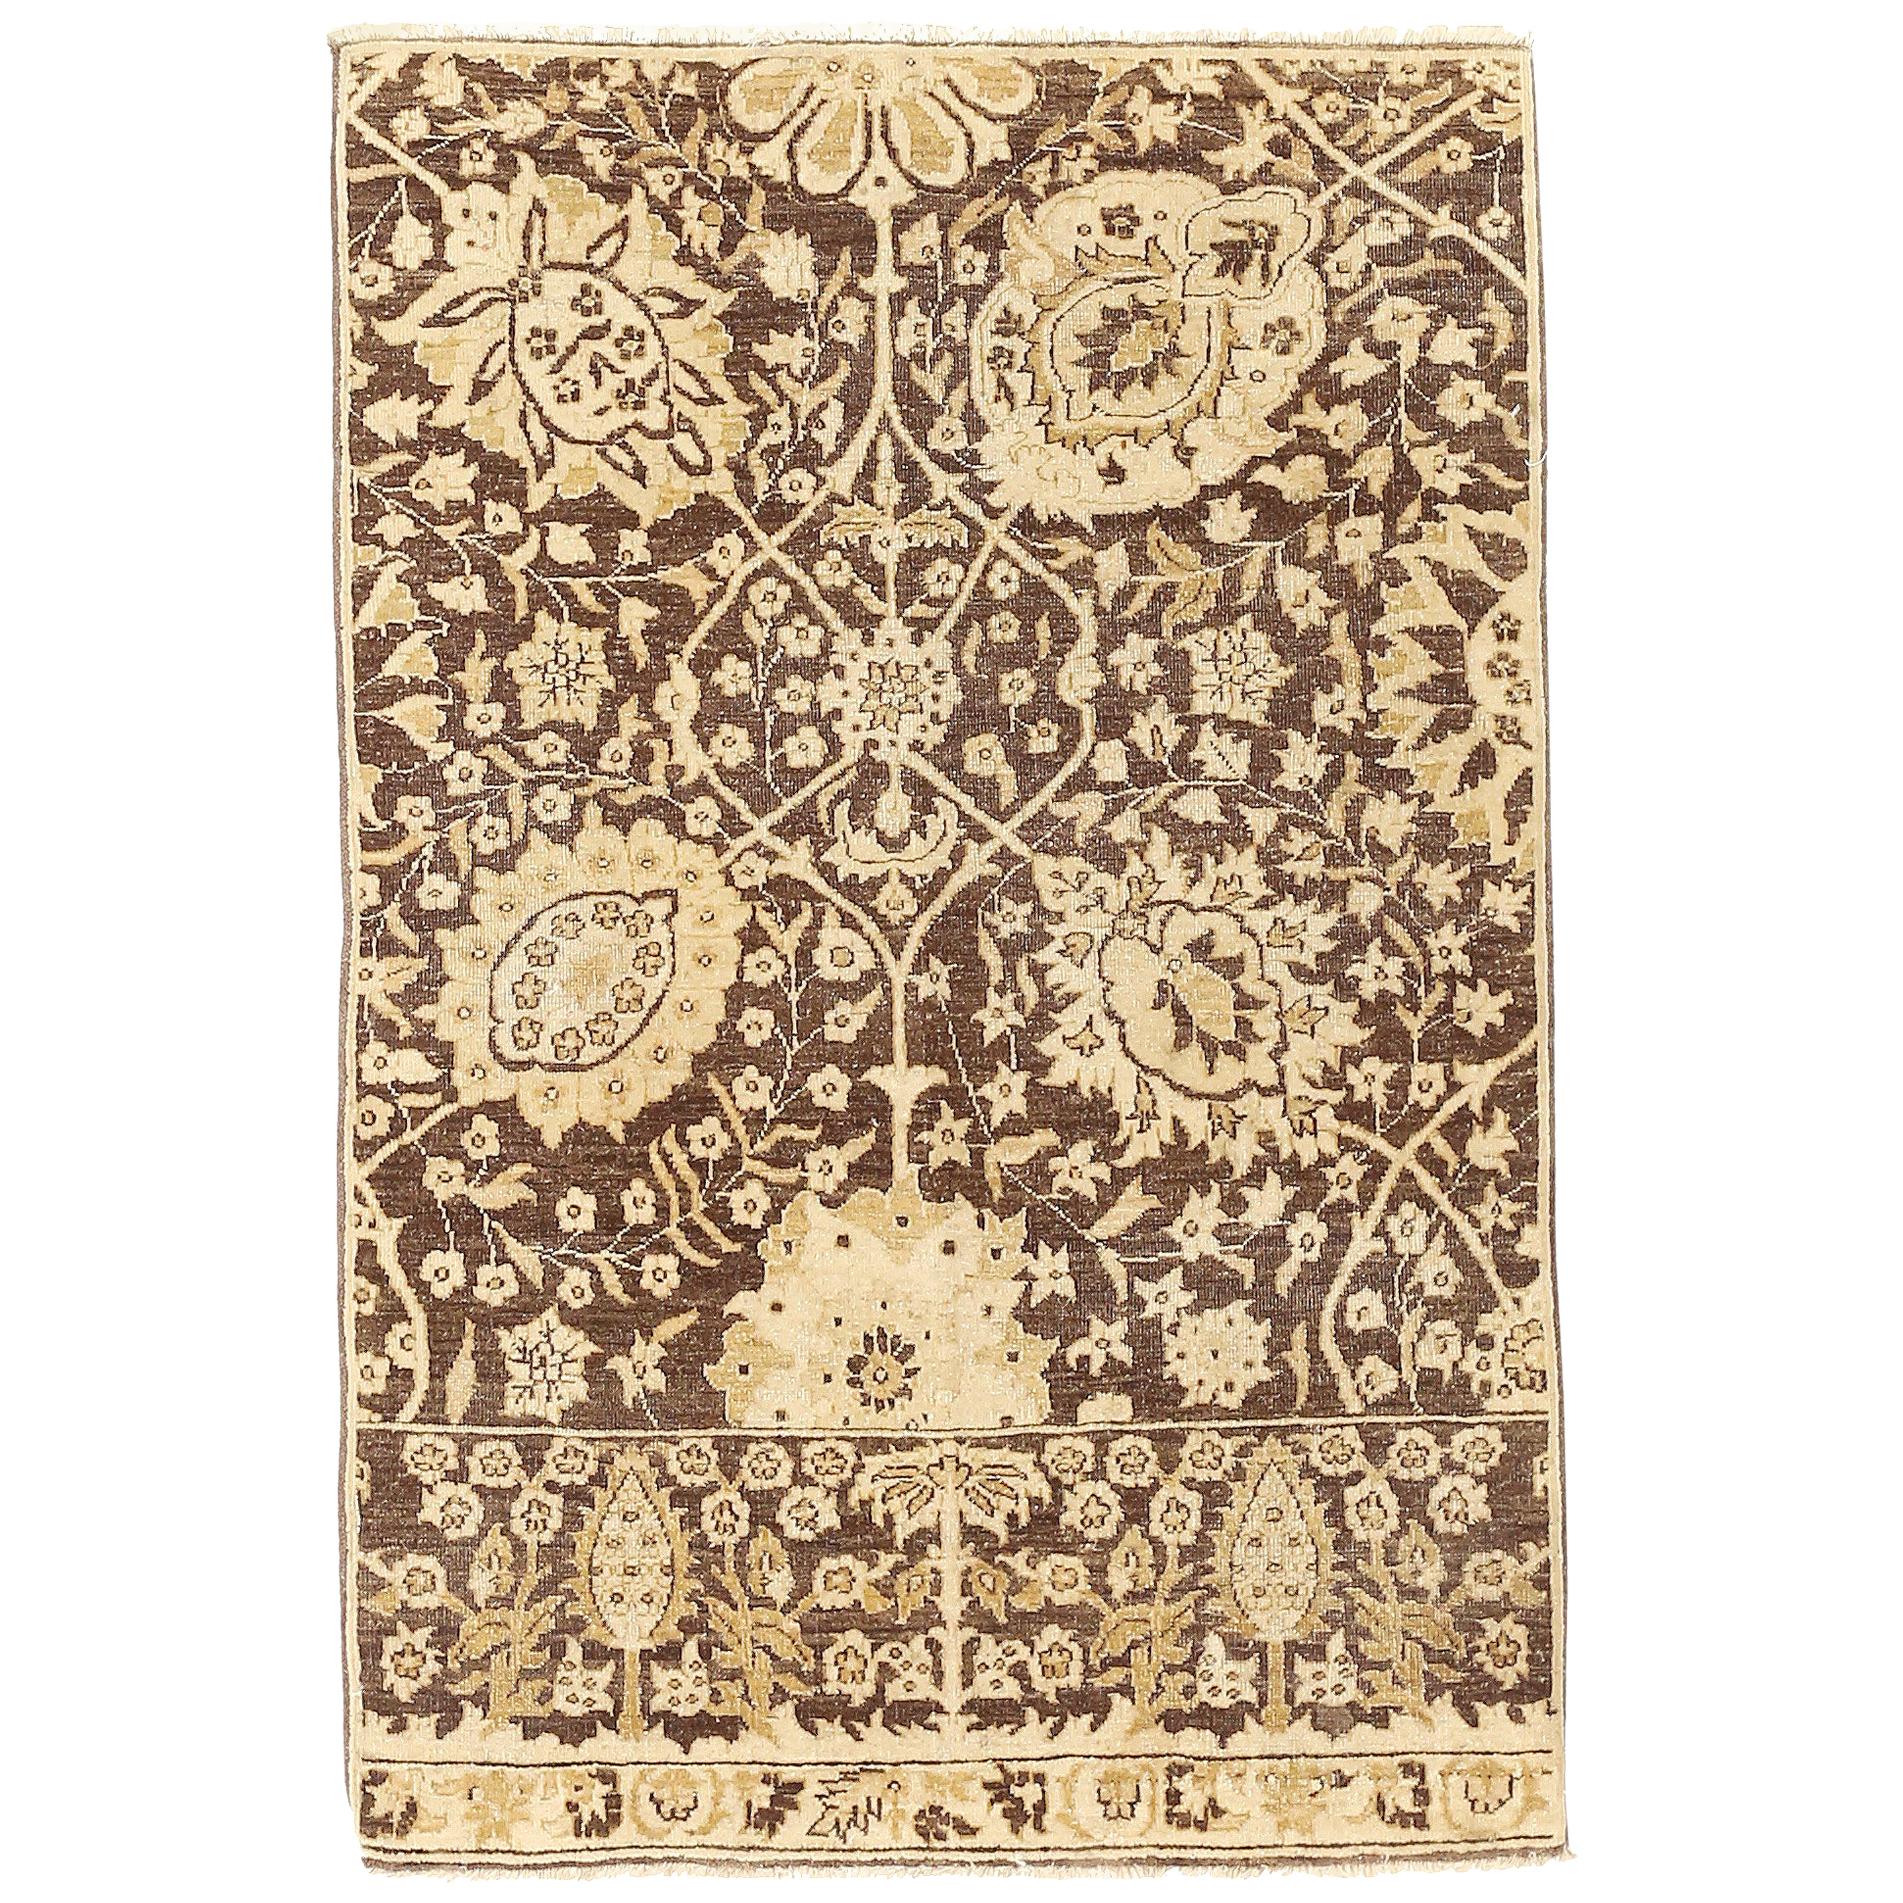 New Tabriz Rug with Beige and Brown Flower Motifs on Ivory Field